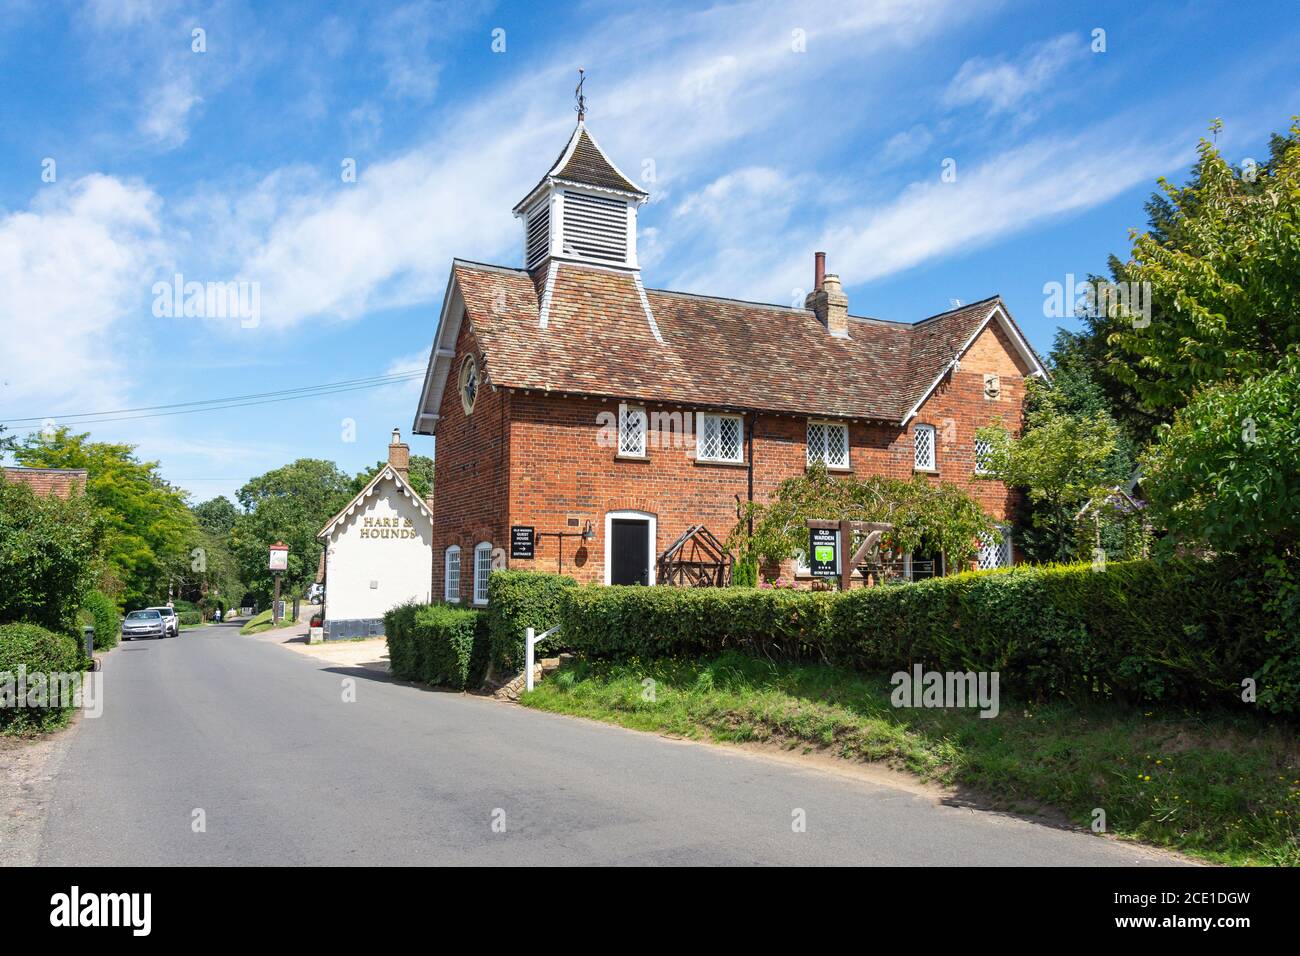 Old Warden Guest House, The Clock House, The Village, Old Warden, Bedfordshire, England, United Kingdom Stock Photo